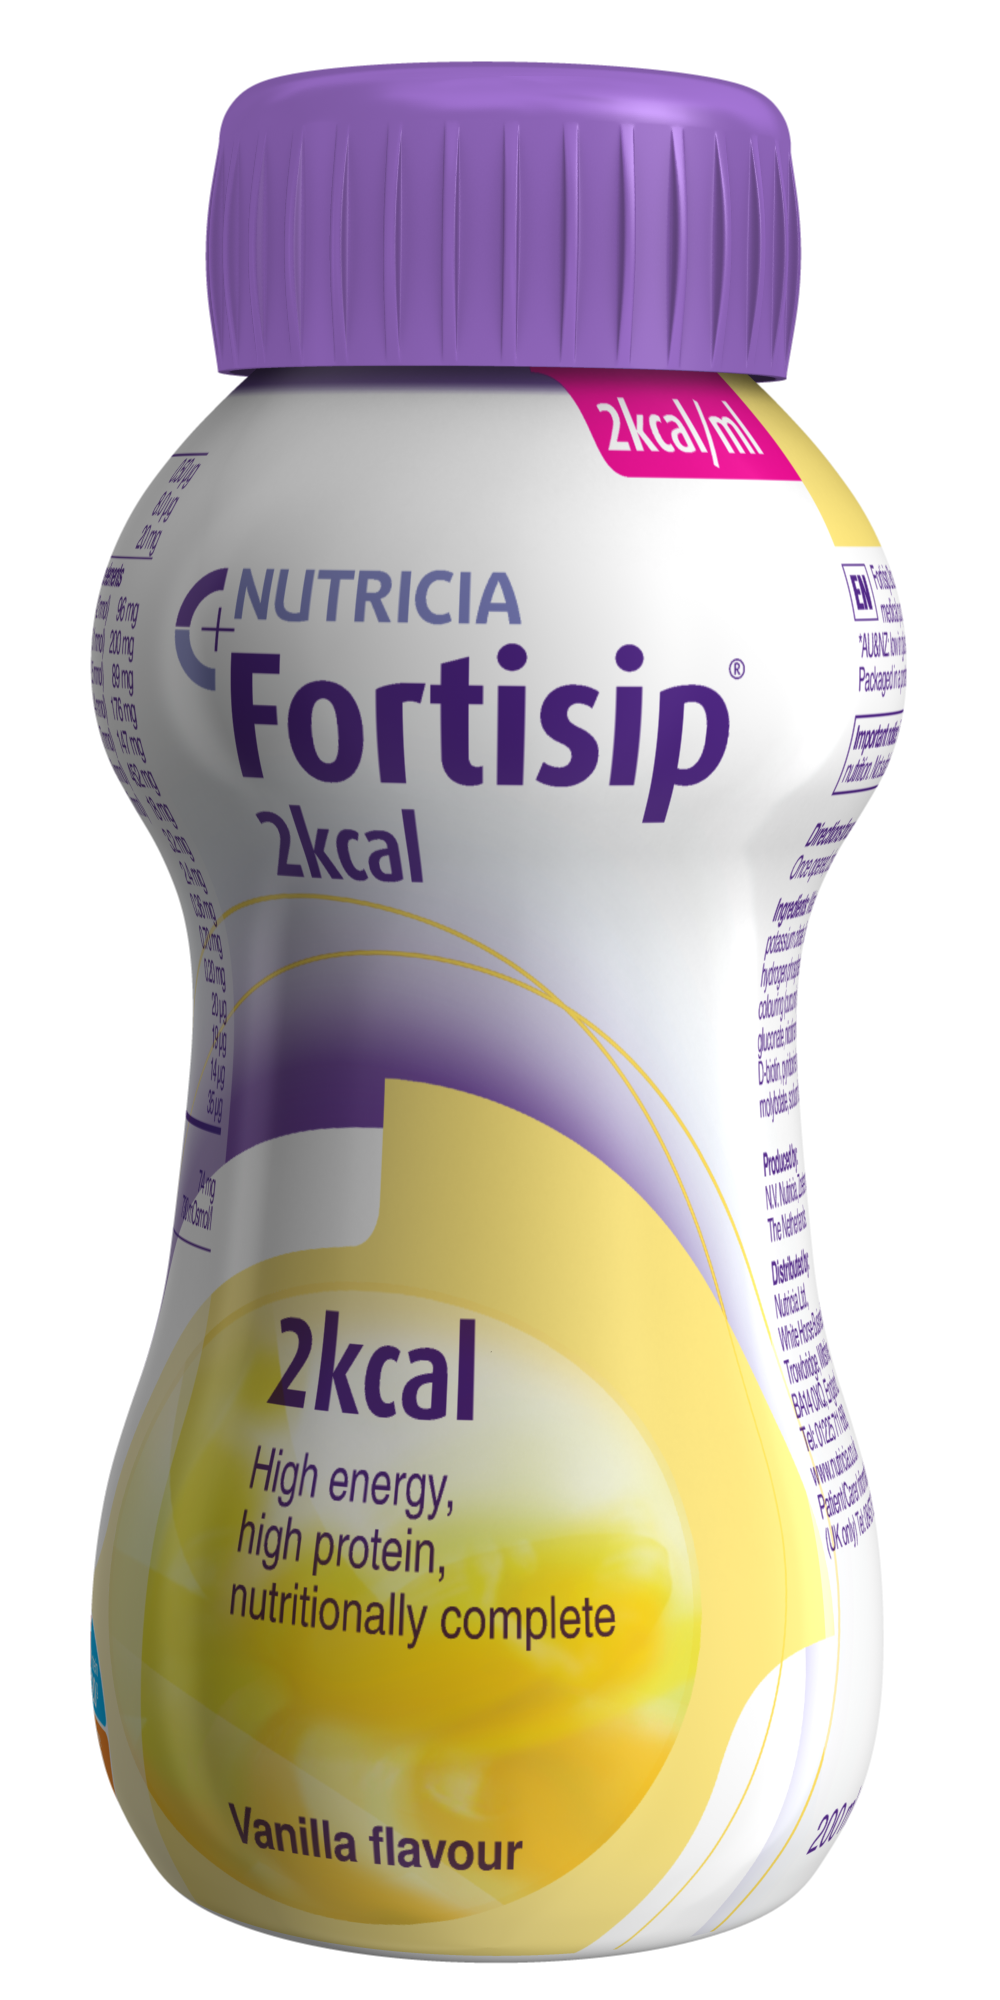 Fortisip 2kcal